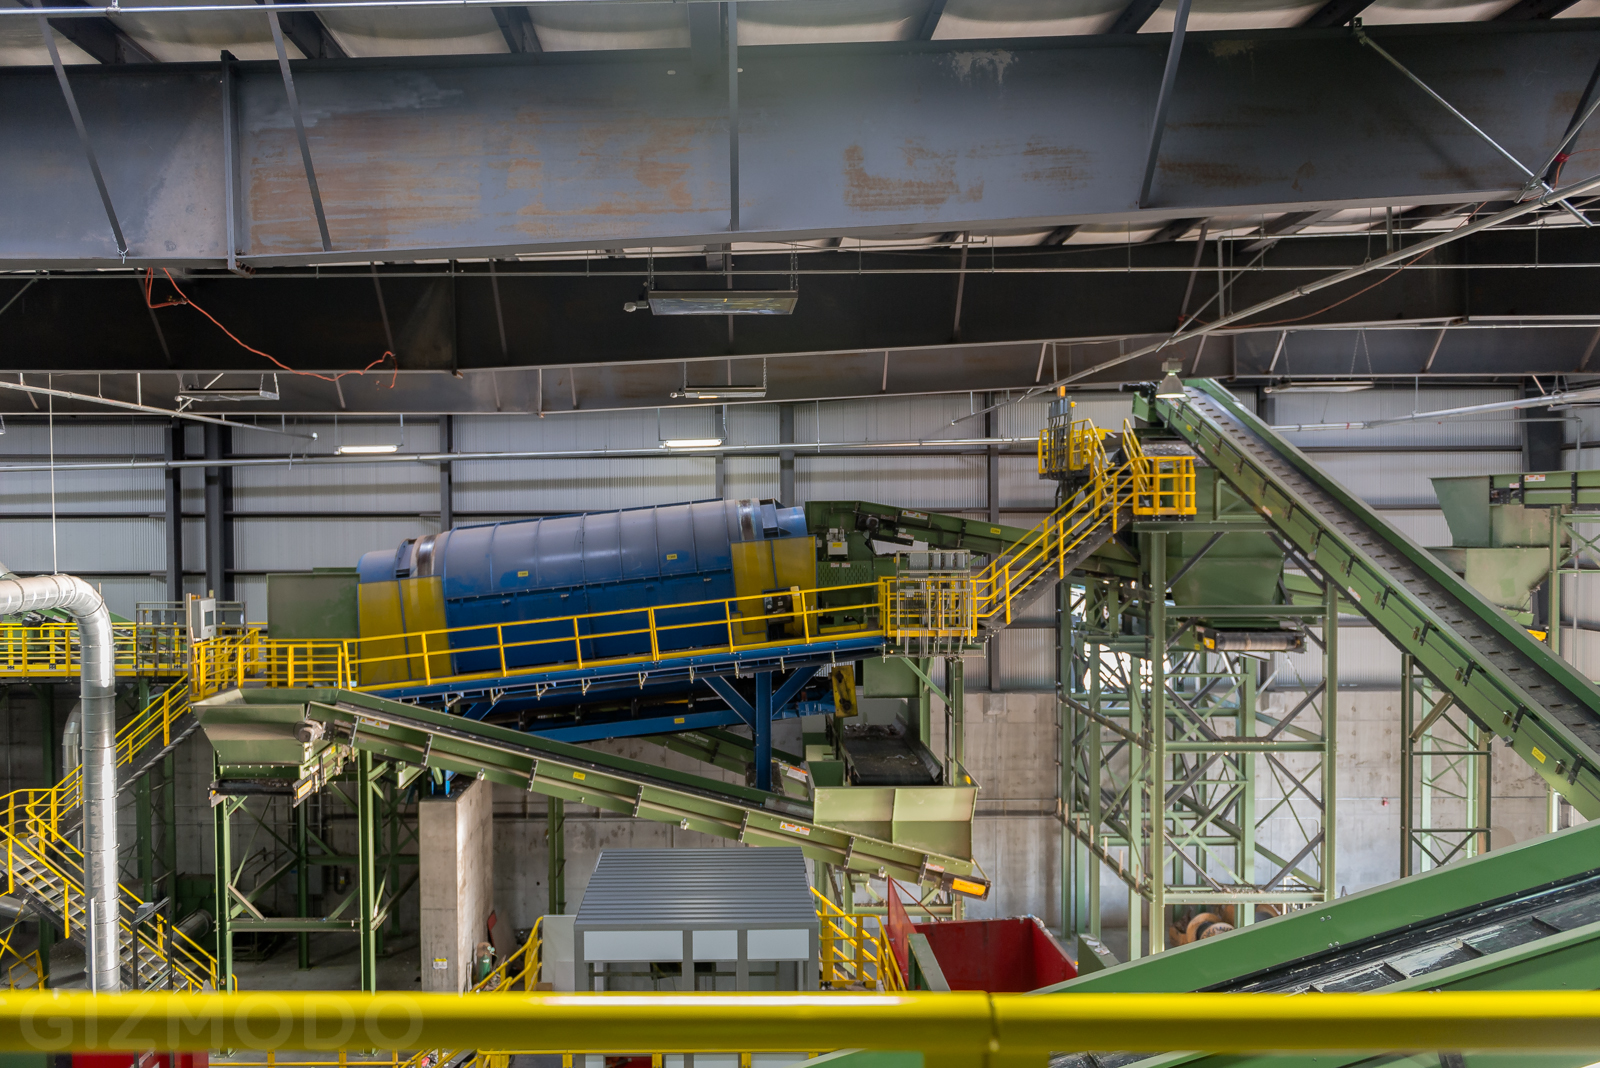 A Tour Of The Largest Commingled Recycling Plant In The US